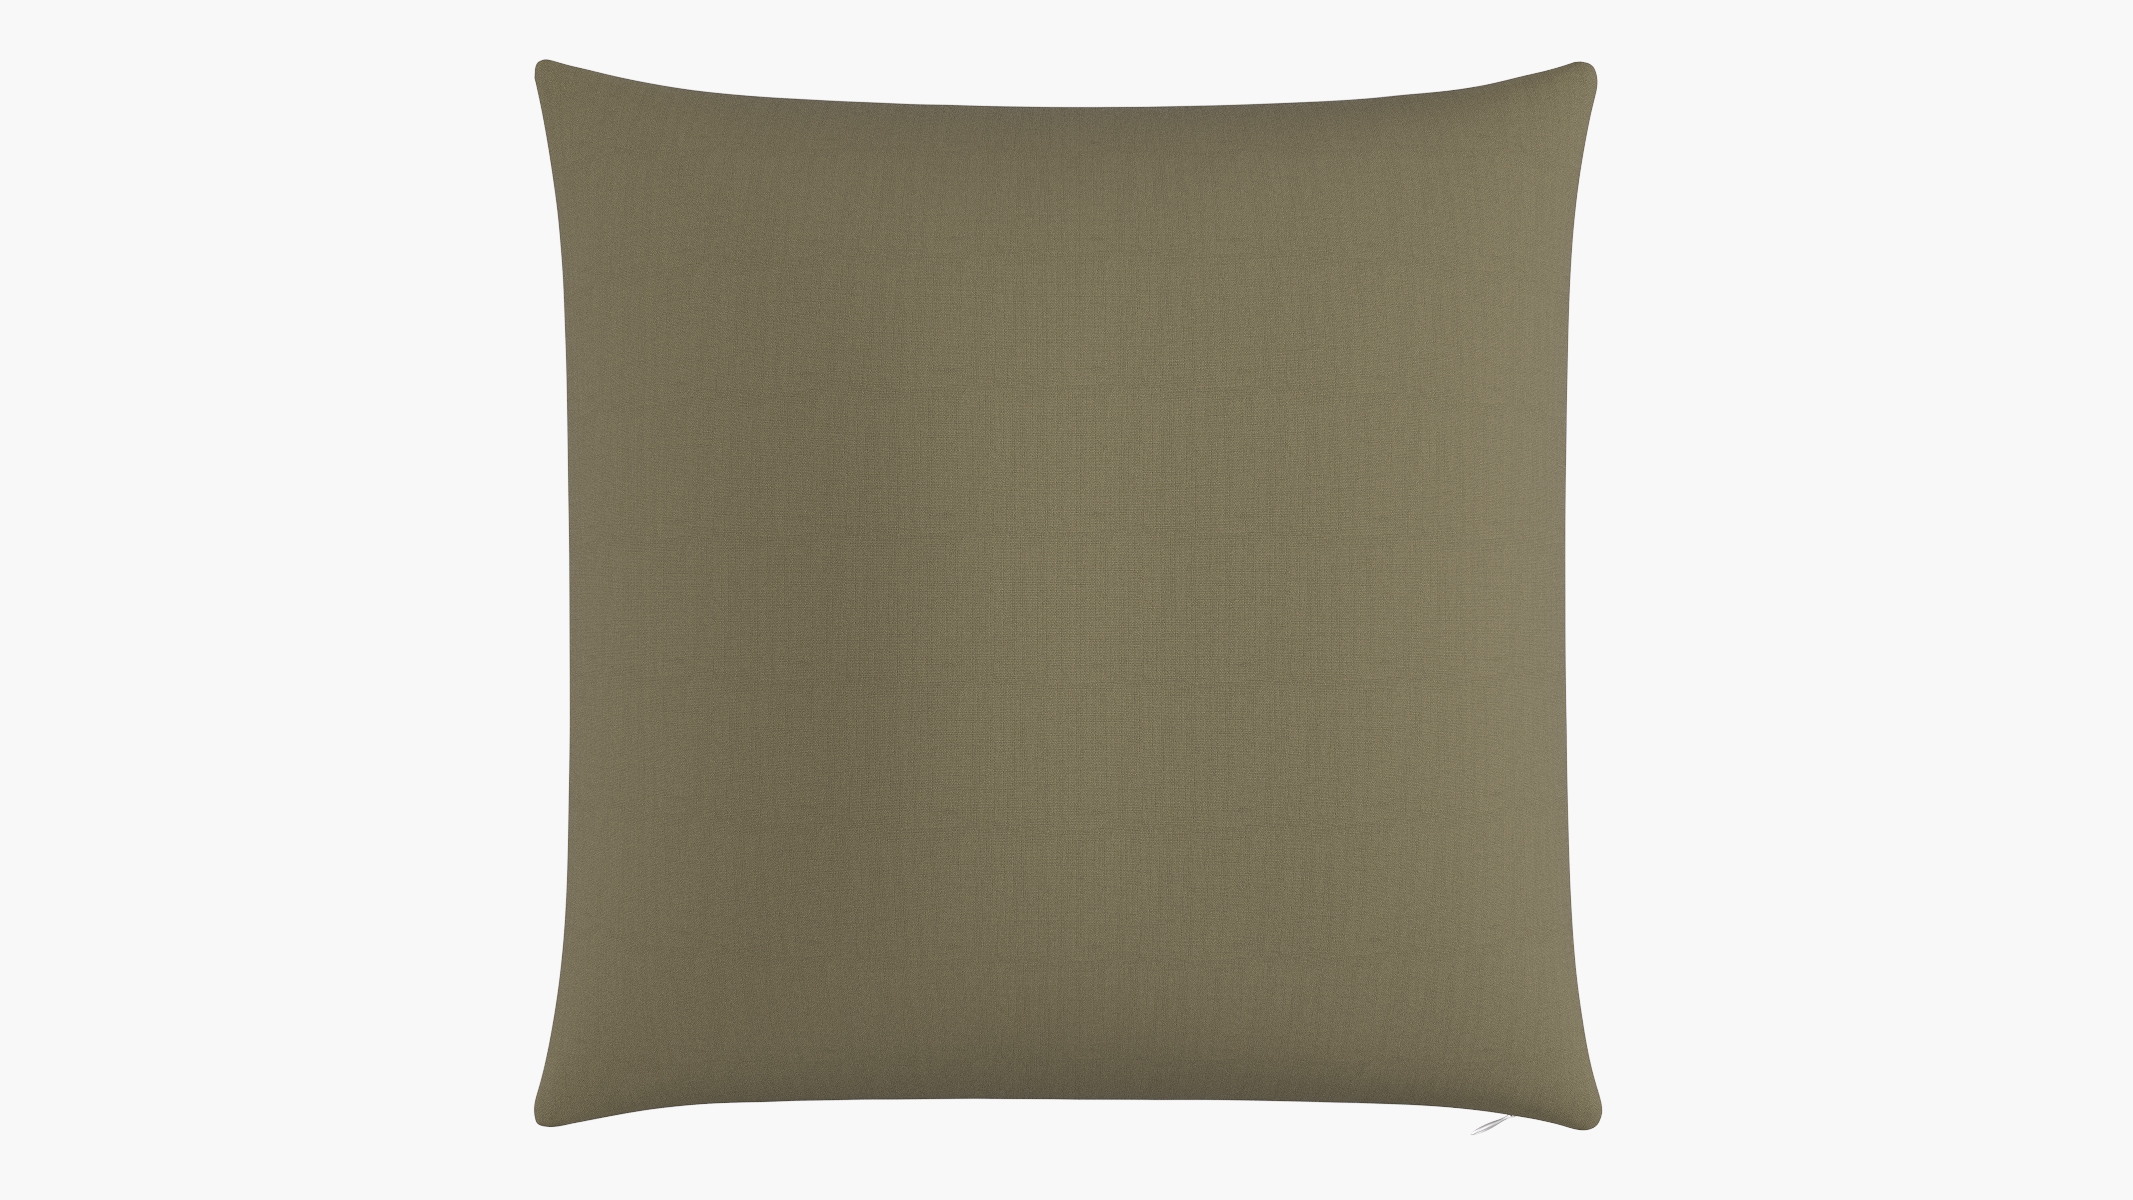 Throw Pillow 26", Olive Everyday Linen, 26" x 26" - Image 0